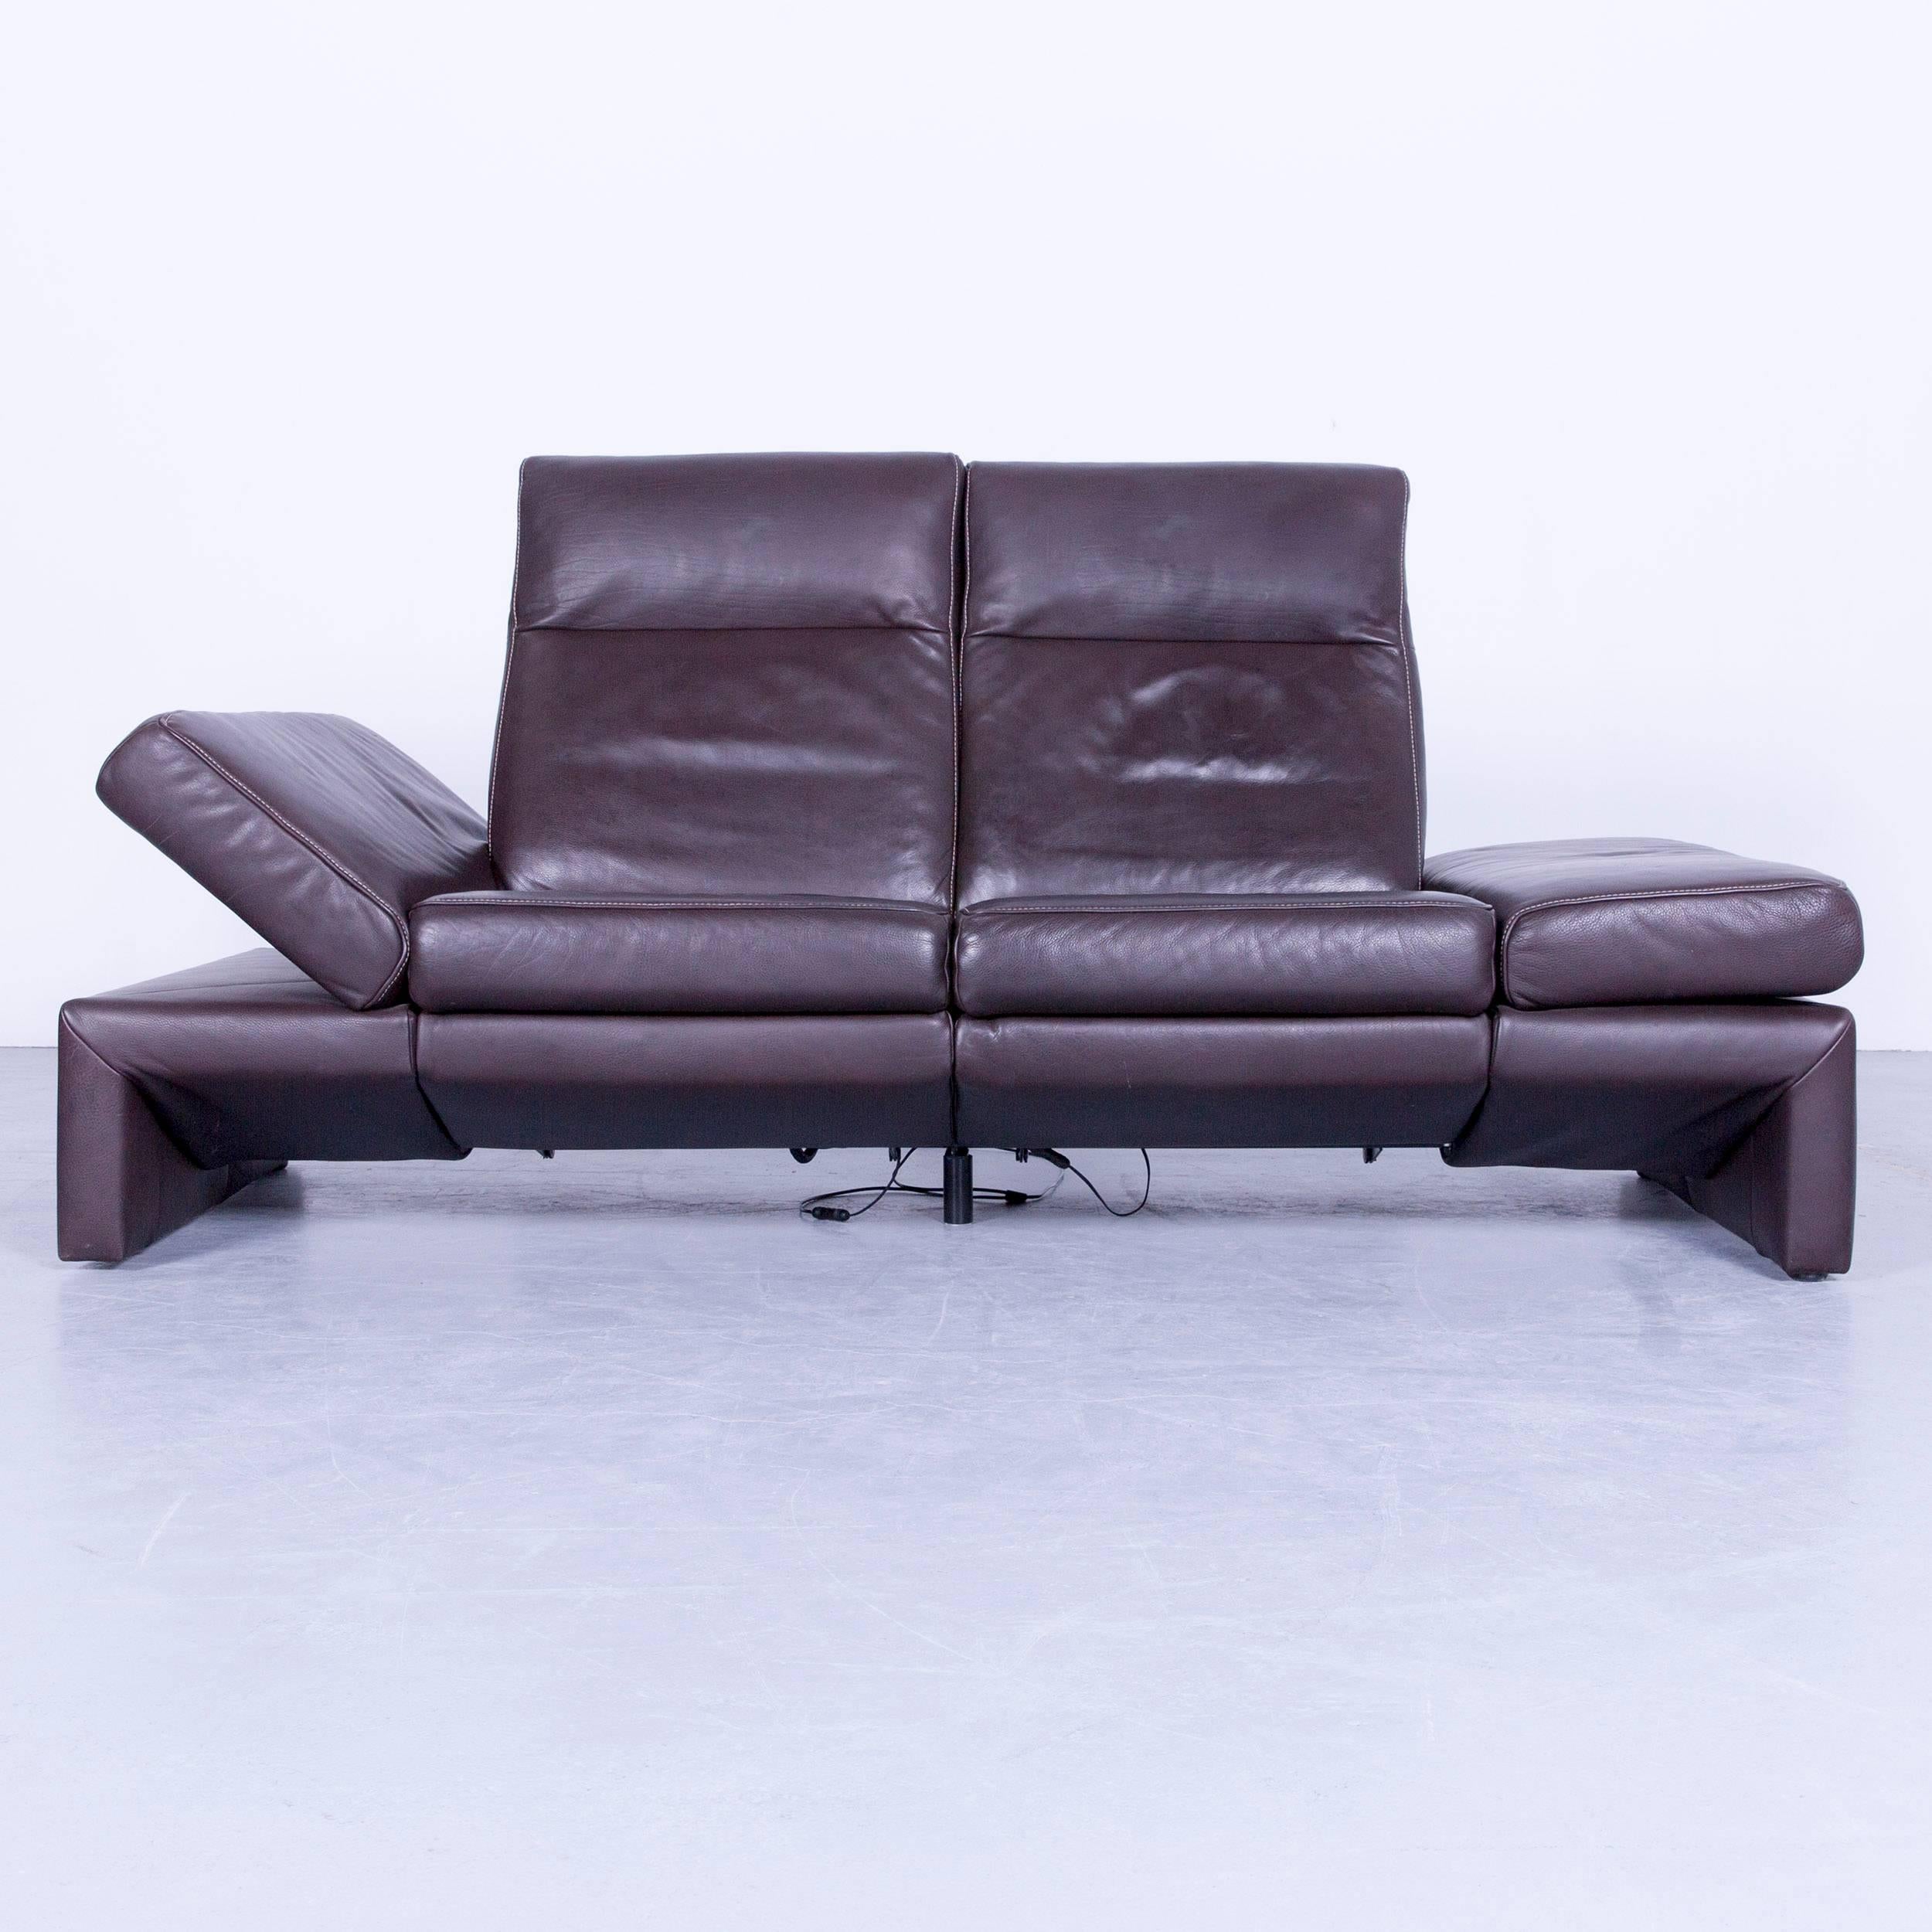 Original Mondo designer sofa brown three-seat couch modern electric recliner function, in a minimalistic design, with convenient functions, made for pure comfort and flexibility.